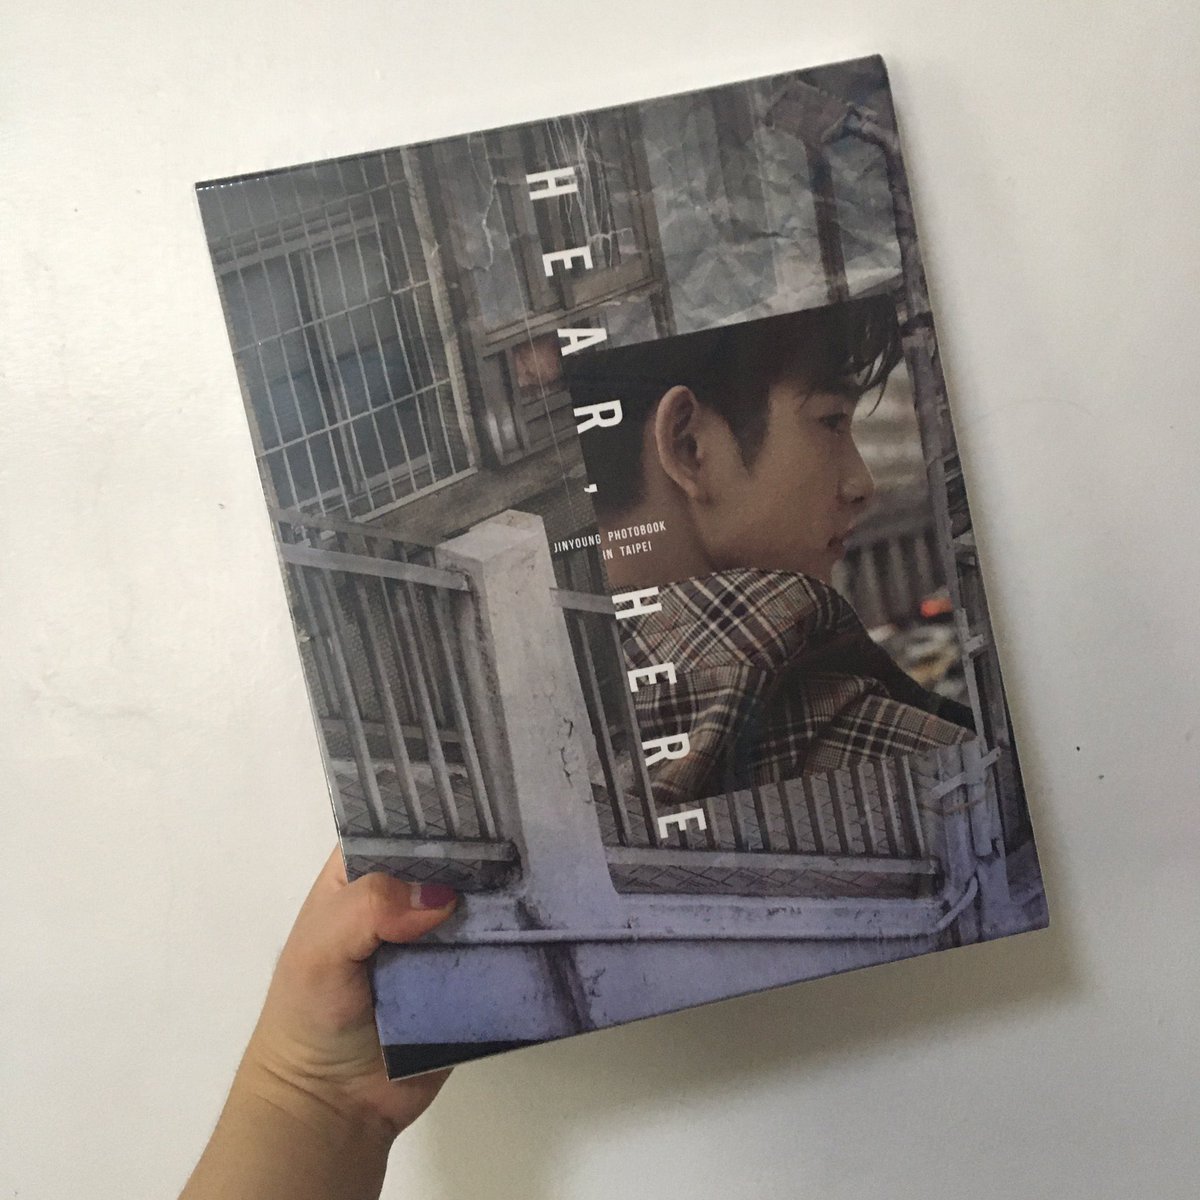 WTS/LFB (ON-HAND) HEAR, HERE Jinyoung Photobook in Taipei (Sealed)₱2,400 plus sfDm me to order